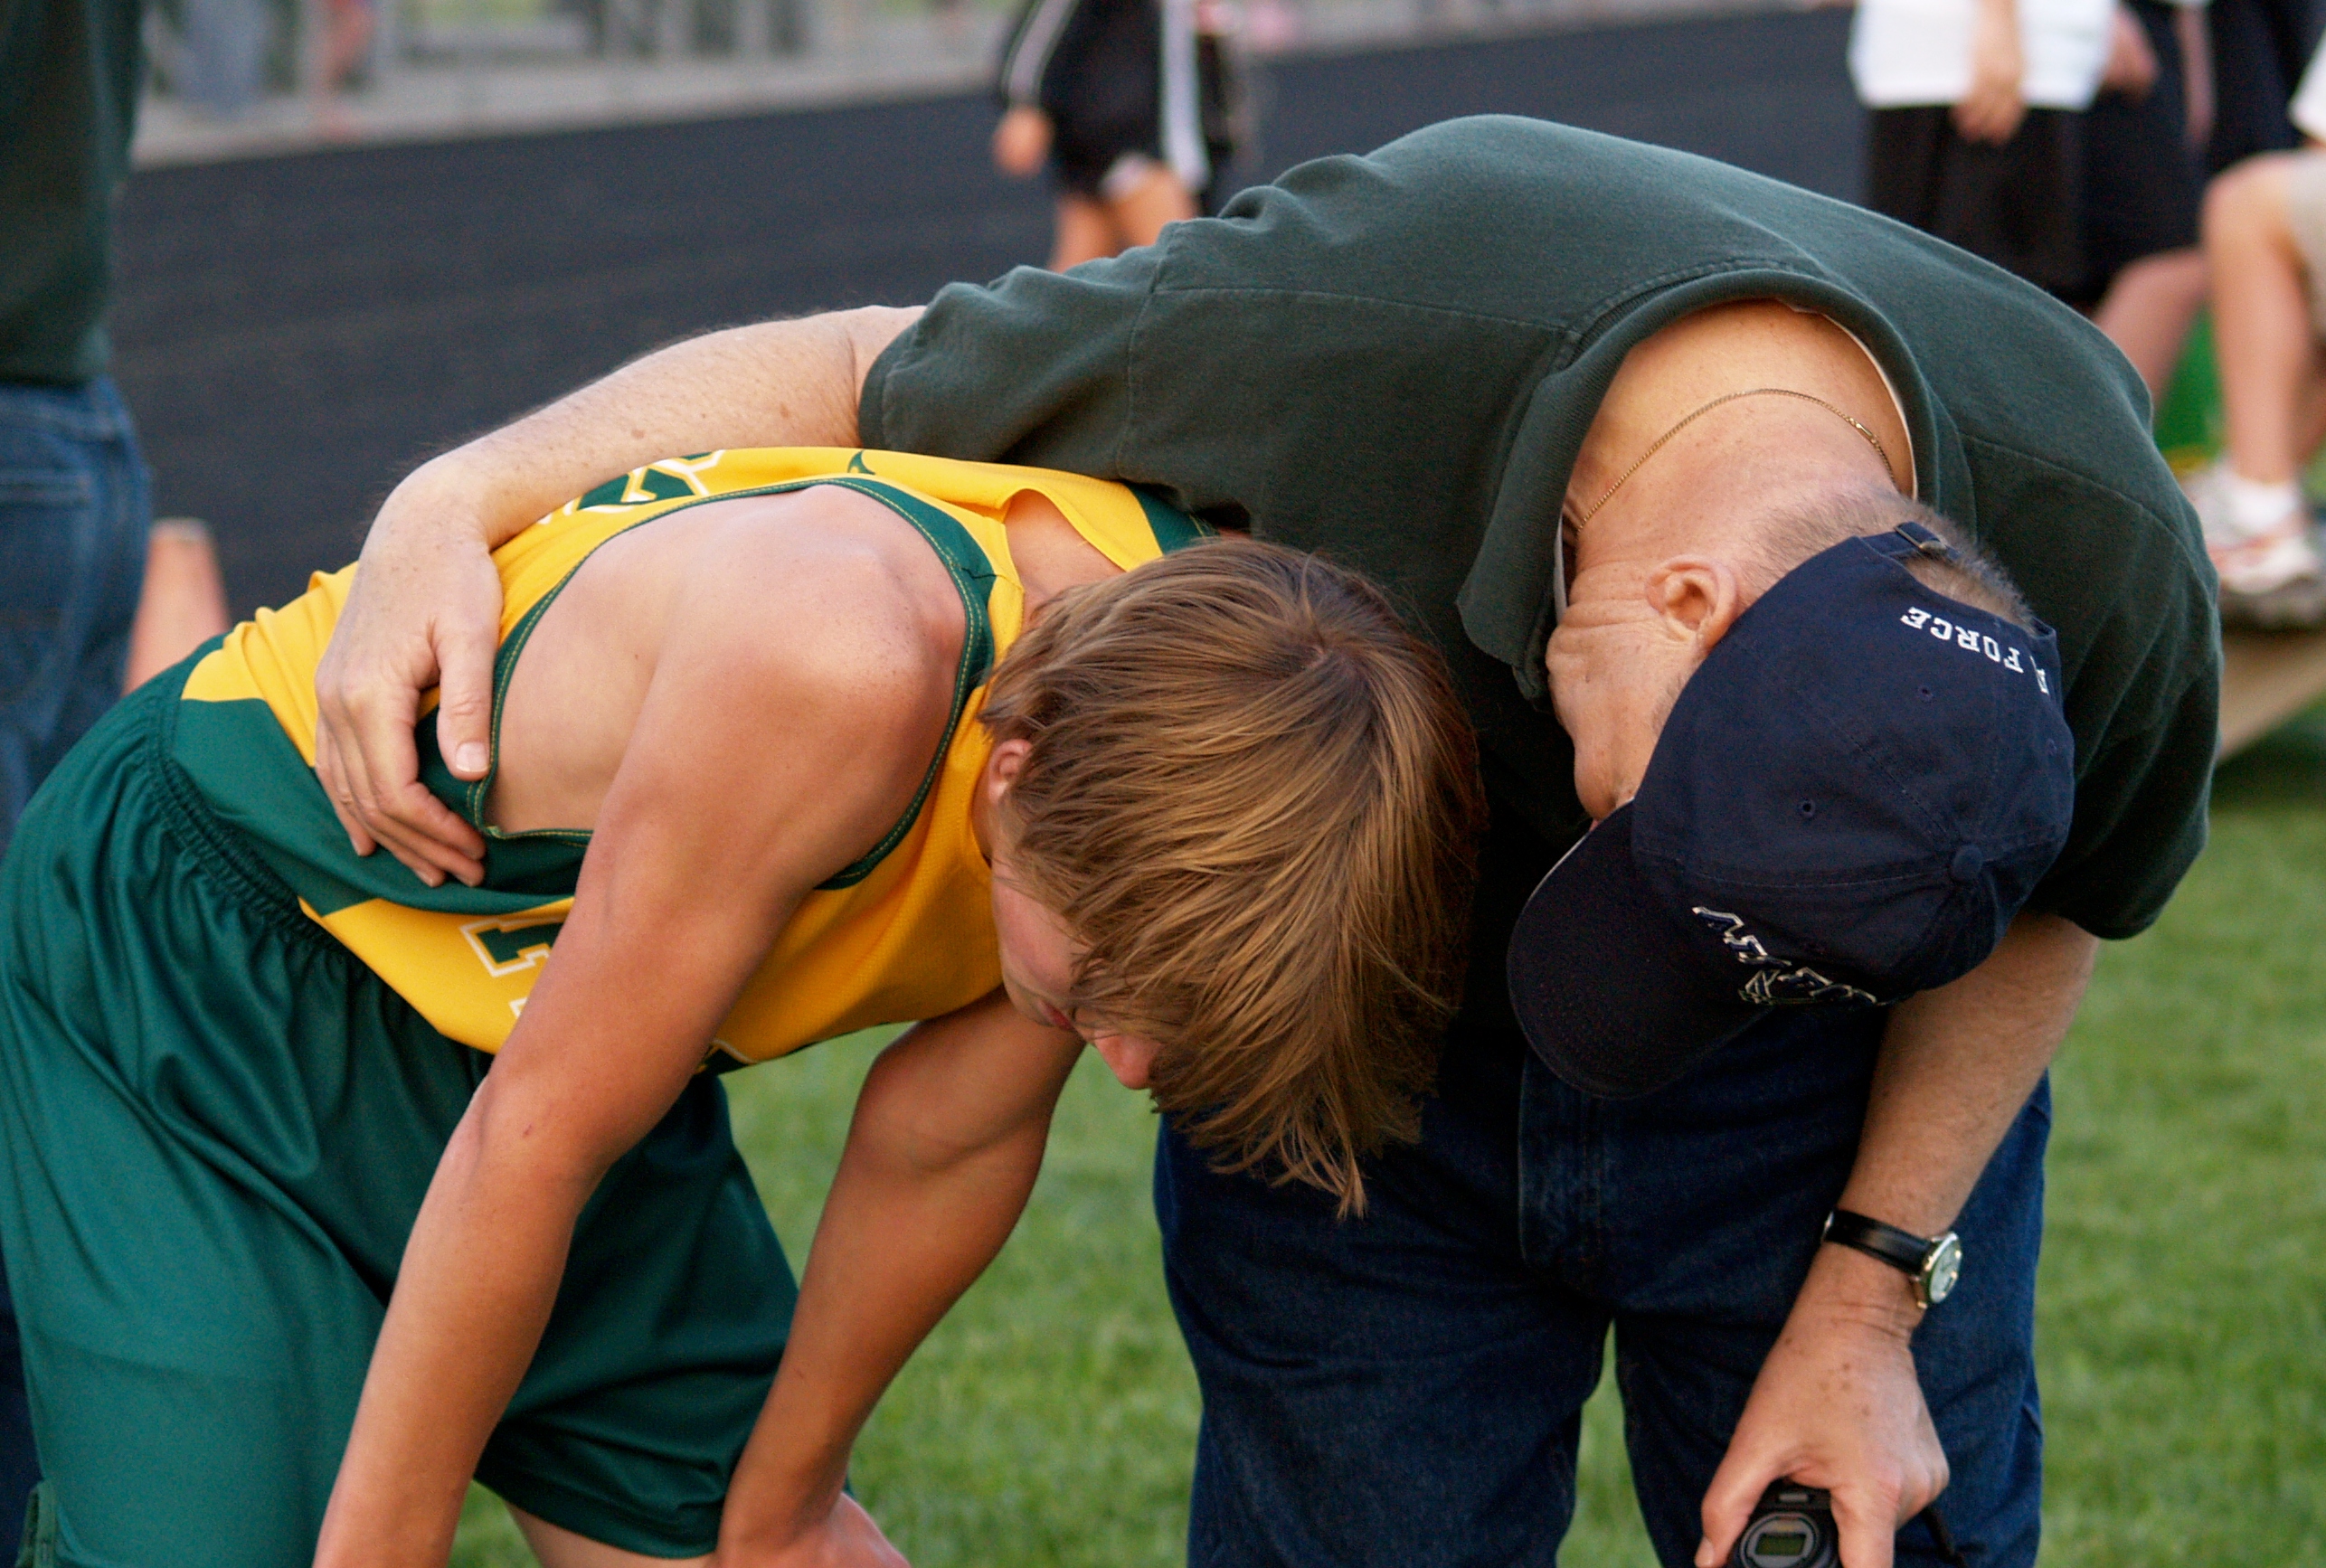 A track coach is leans down next to a young runner who, apparently just completed a race. The coach has his arm around the runner and appears to be consoling him.